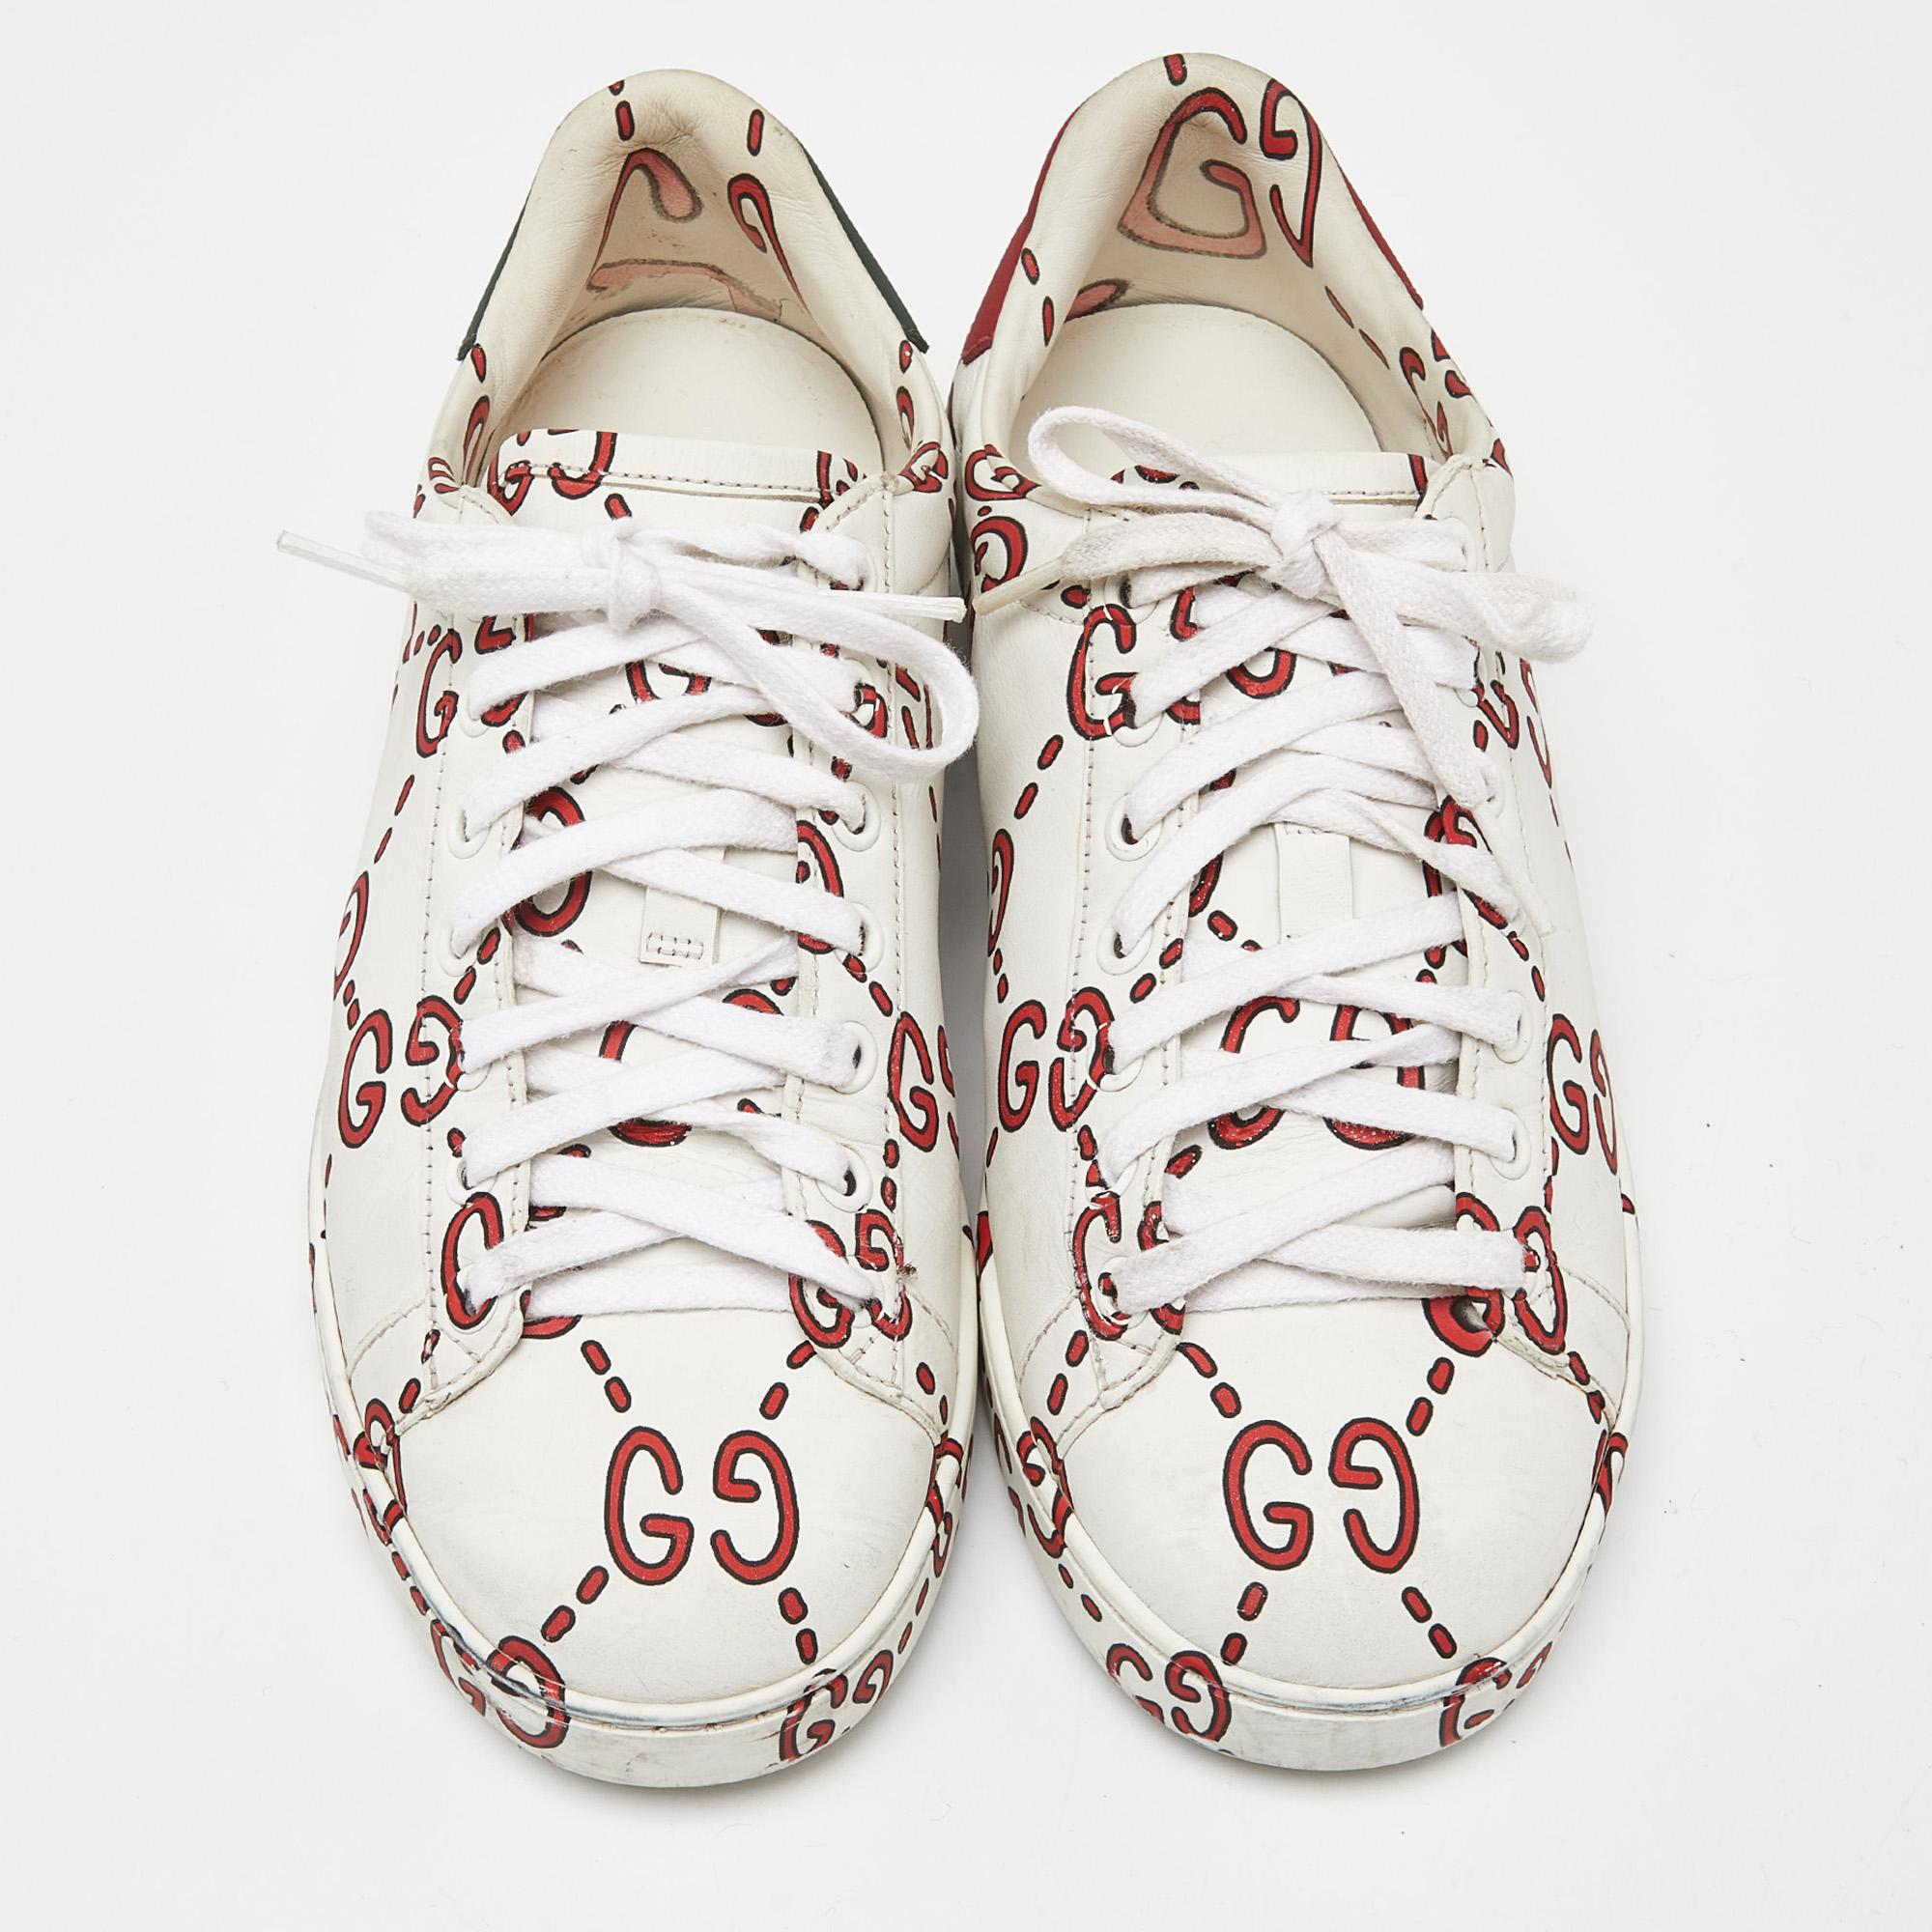 Introducing the Gucci Ghost GG Ace Sneakers, a fusion of contemporary style and timeless craftsmanship. Crafted from premium leather, these sneakers boast a sleek tri-color design with the iconic GG motif. With a comfortable fit and striking